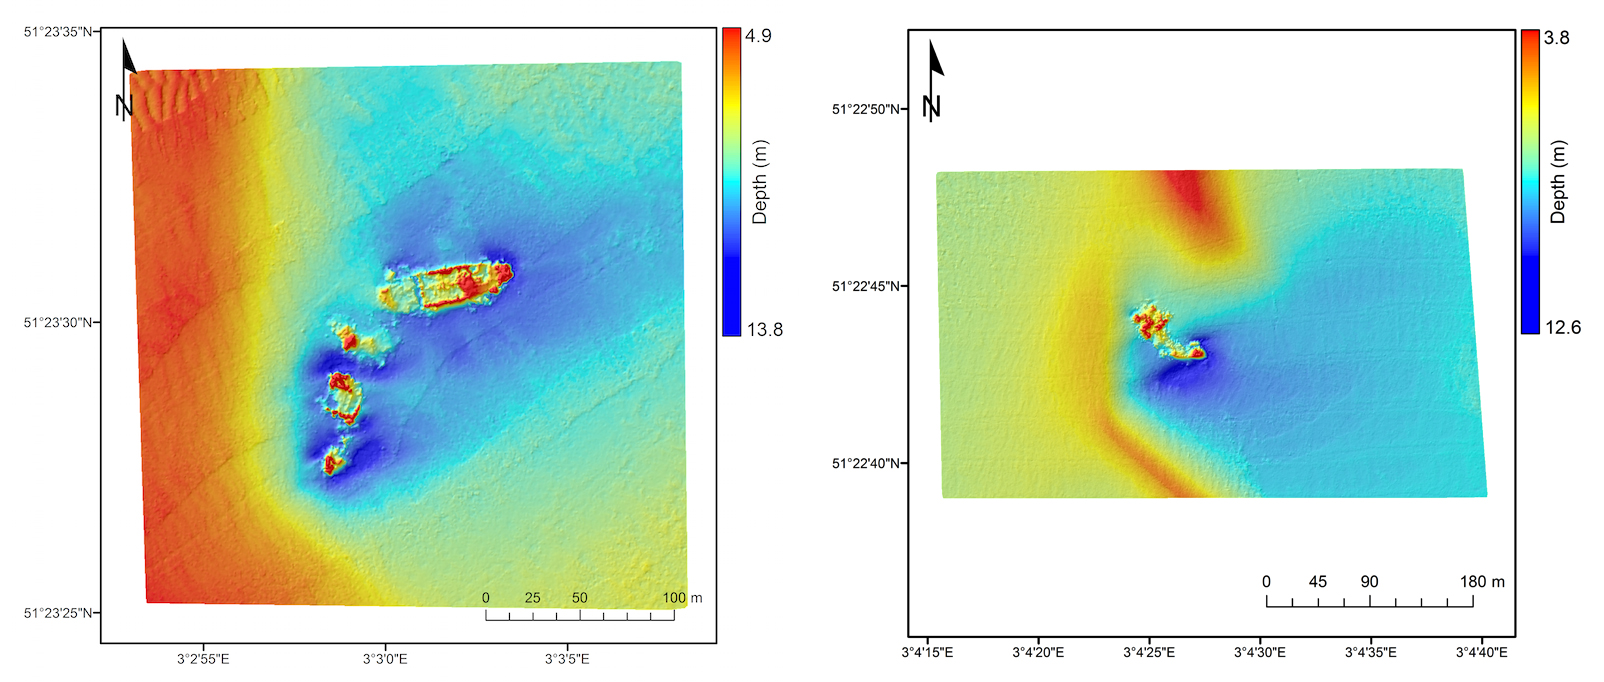 two rainbow colored elevation images showing debris with labels